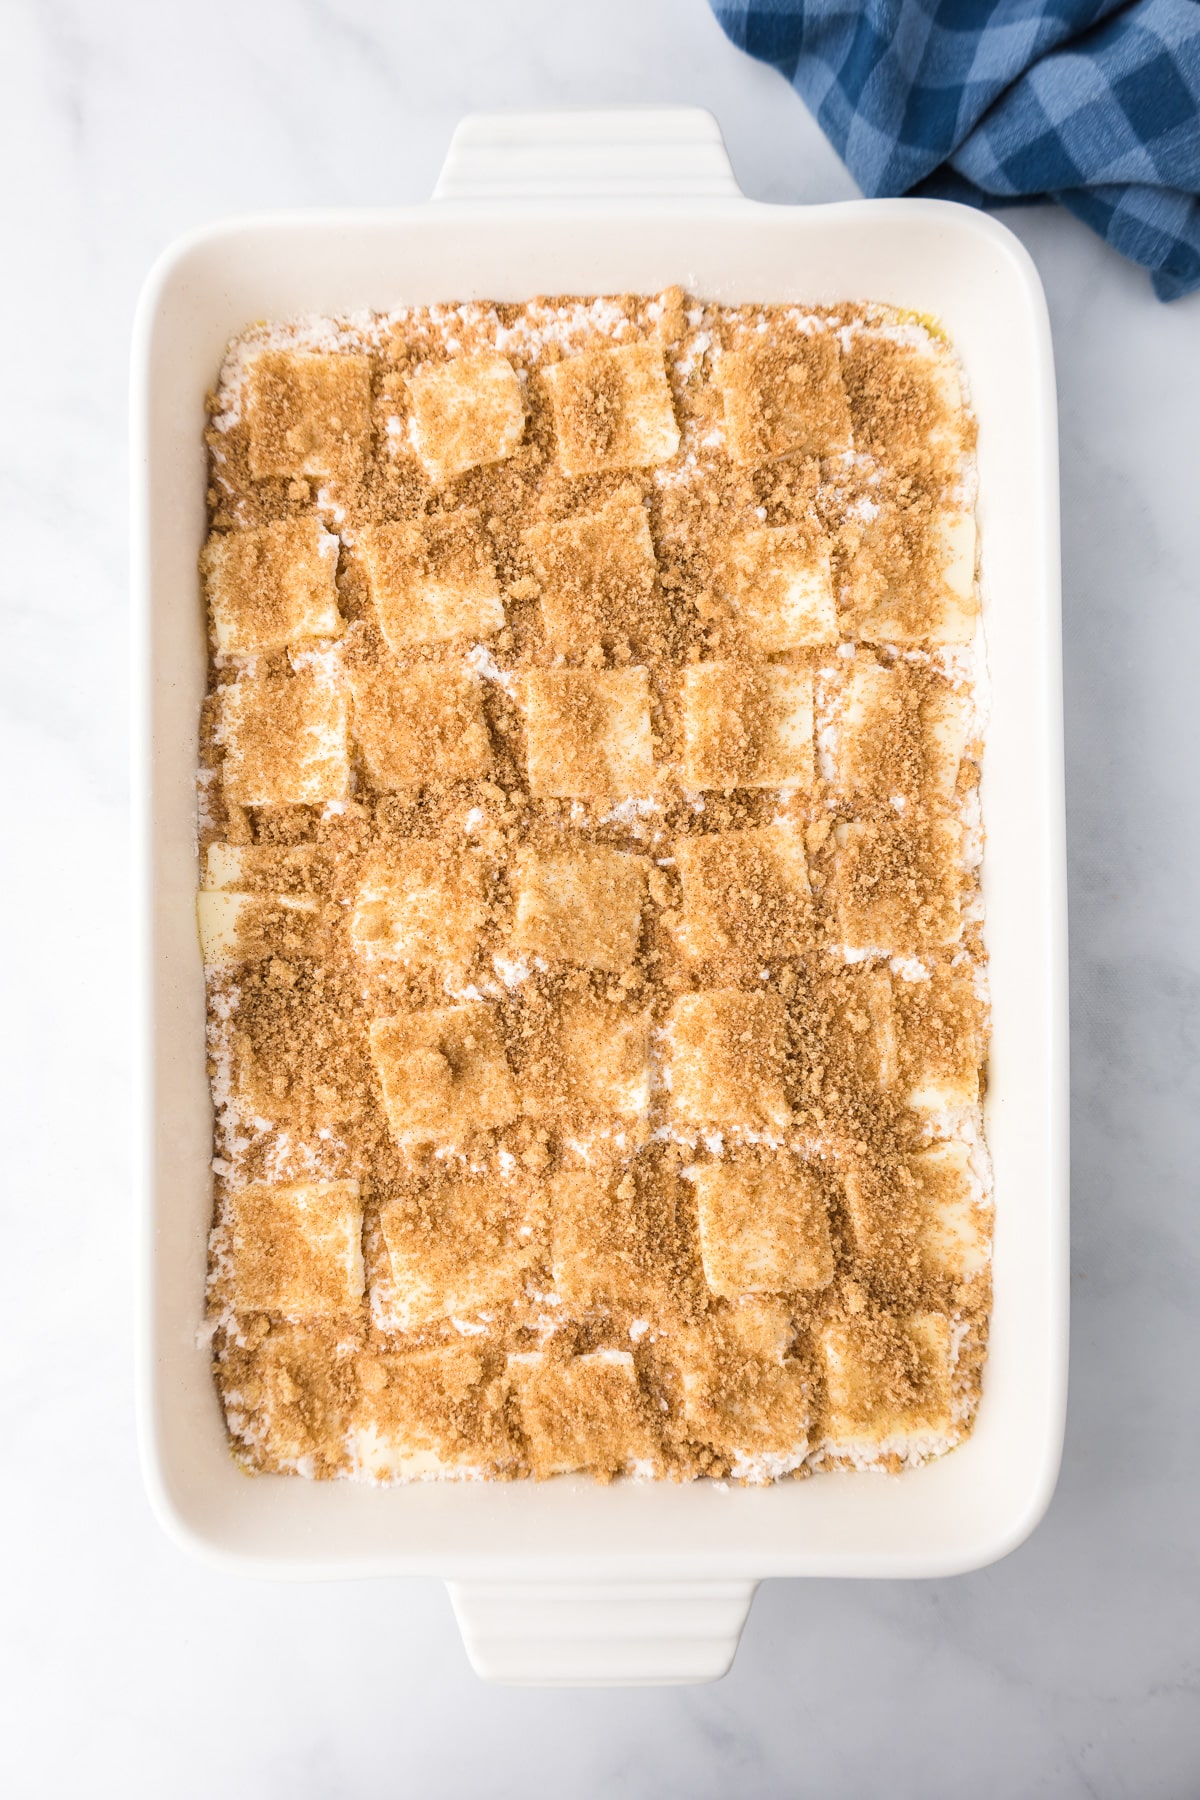 Cinnamon sugart layered over pats of butter, cake mix and peaches in a pan from overhead on a counter in a large rectangular baking dish.